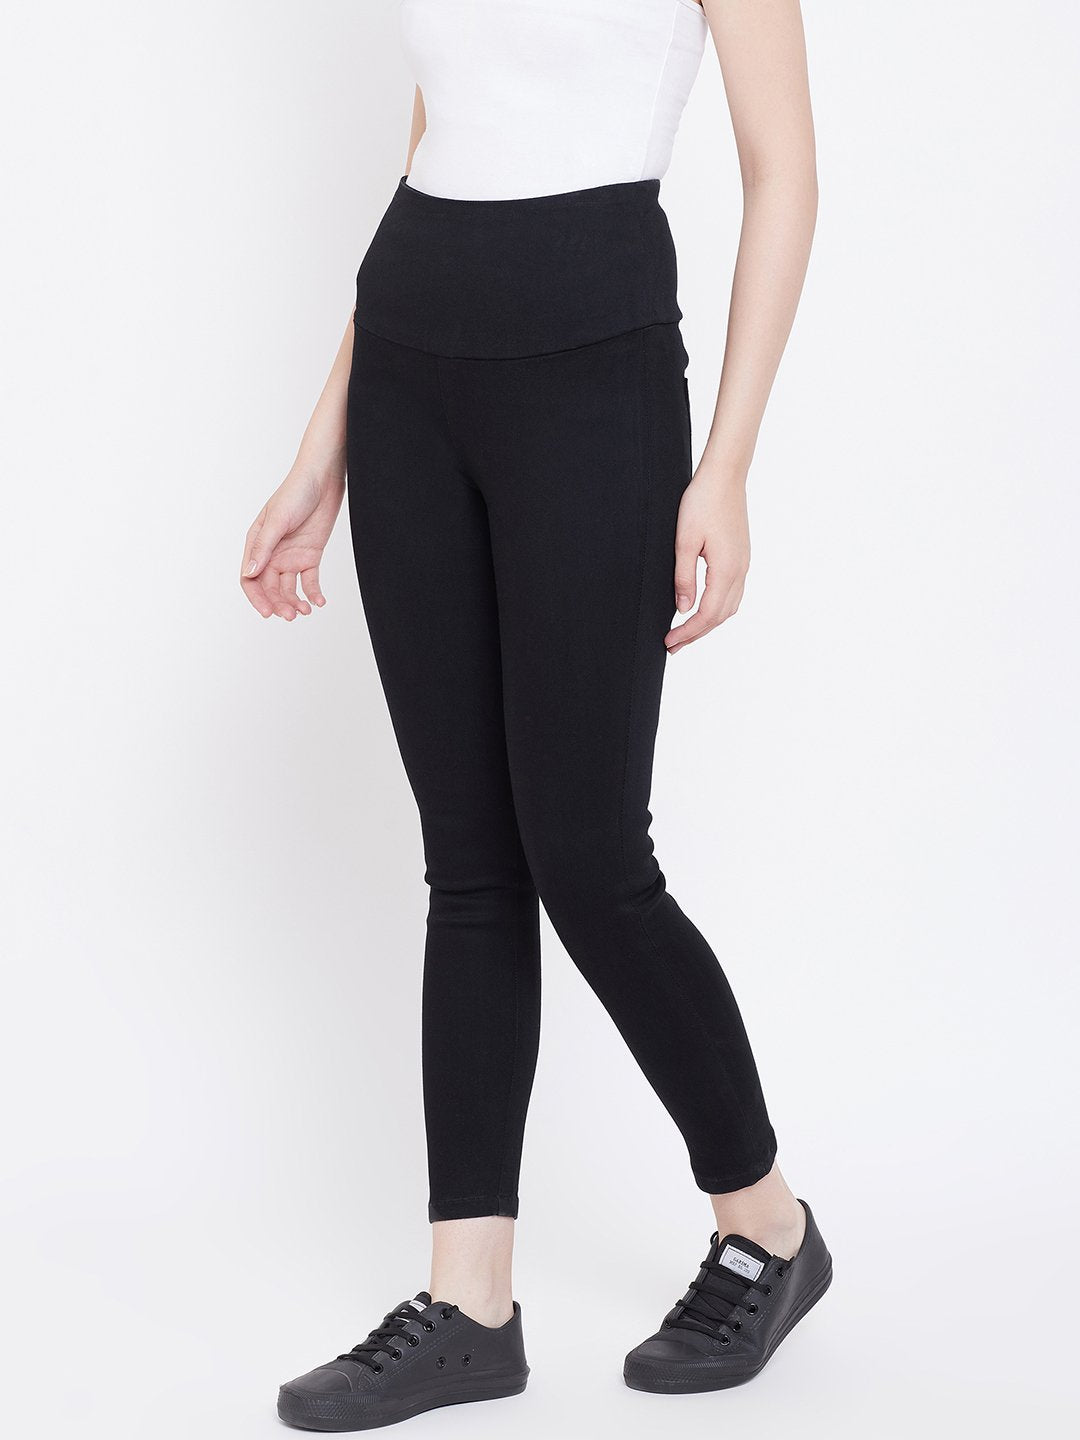 High Waist Stretchable Black Jeggings - NiftyJeans